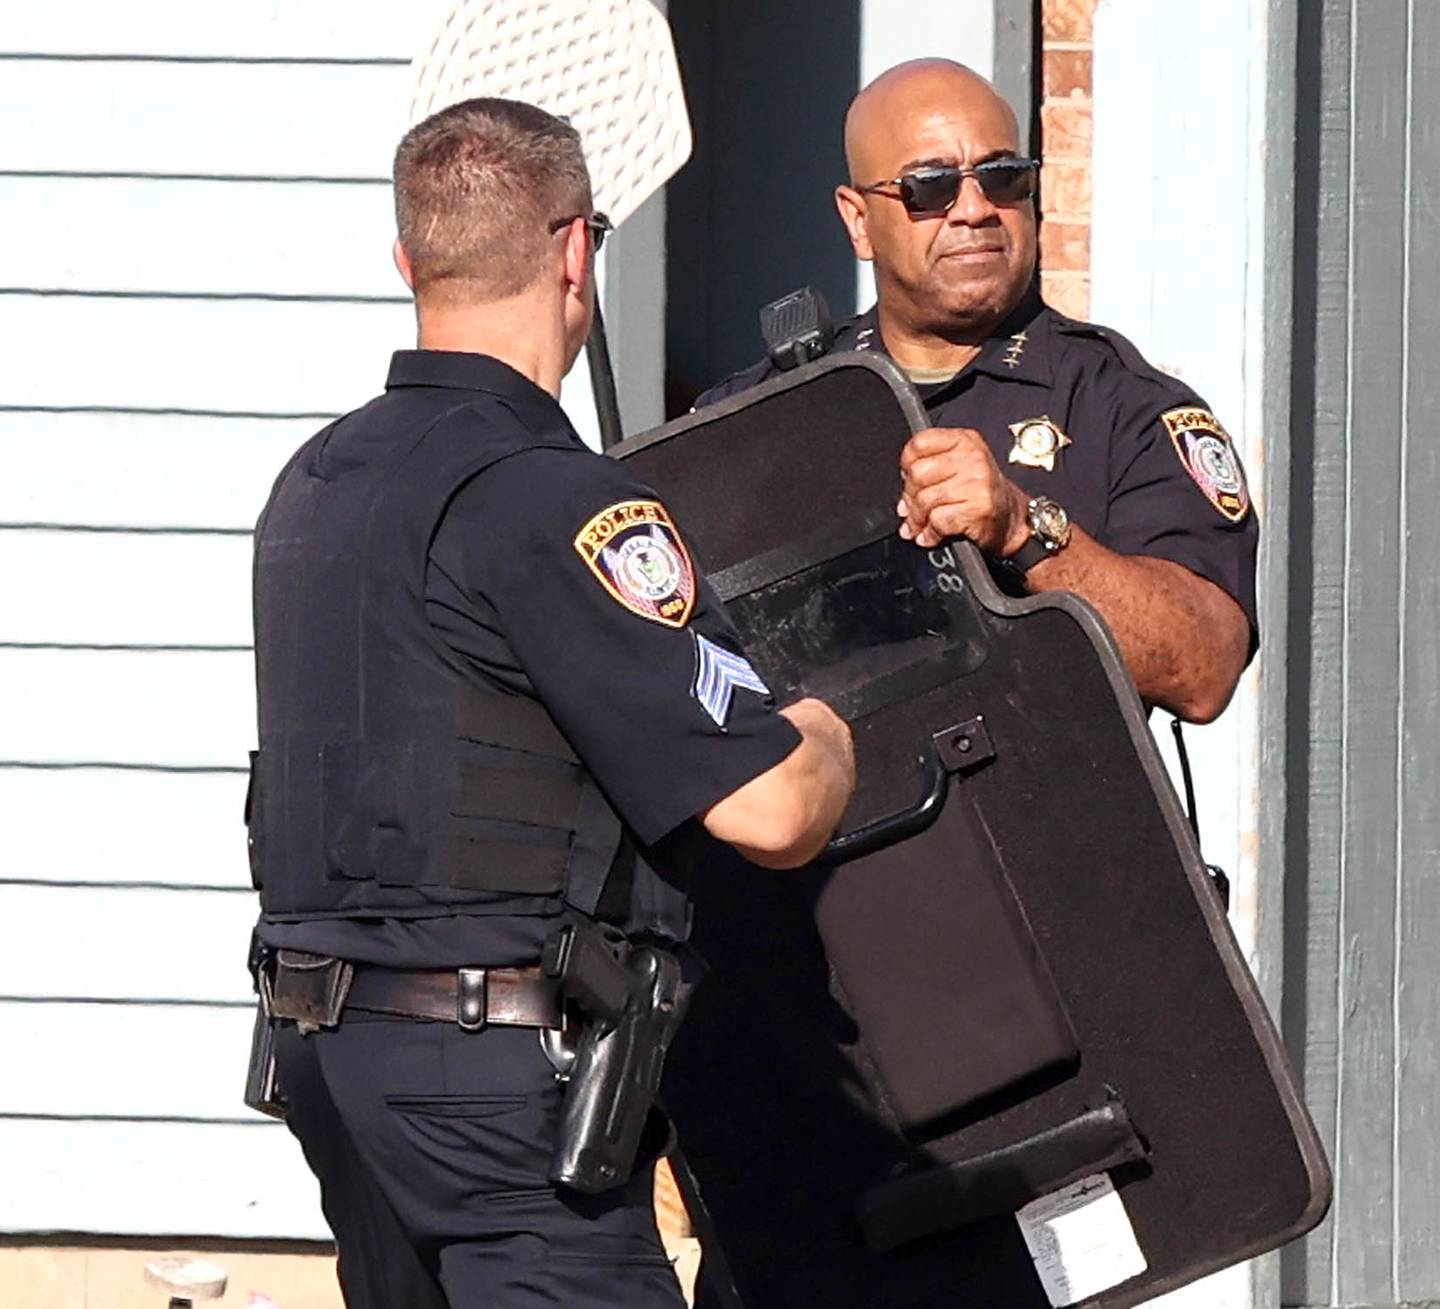 DeKalb Police Chief David Byrd (right) hands a shield back to an officer at the scene of a shooting Wednesday, Aug. 24, 2022, at West Ridge Apartments in DeKalb.